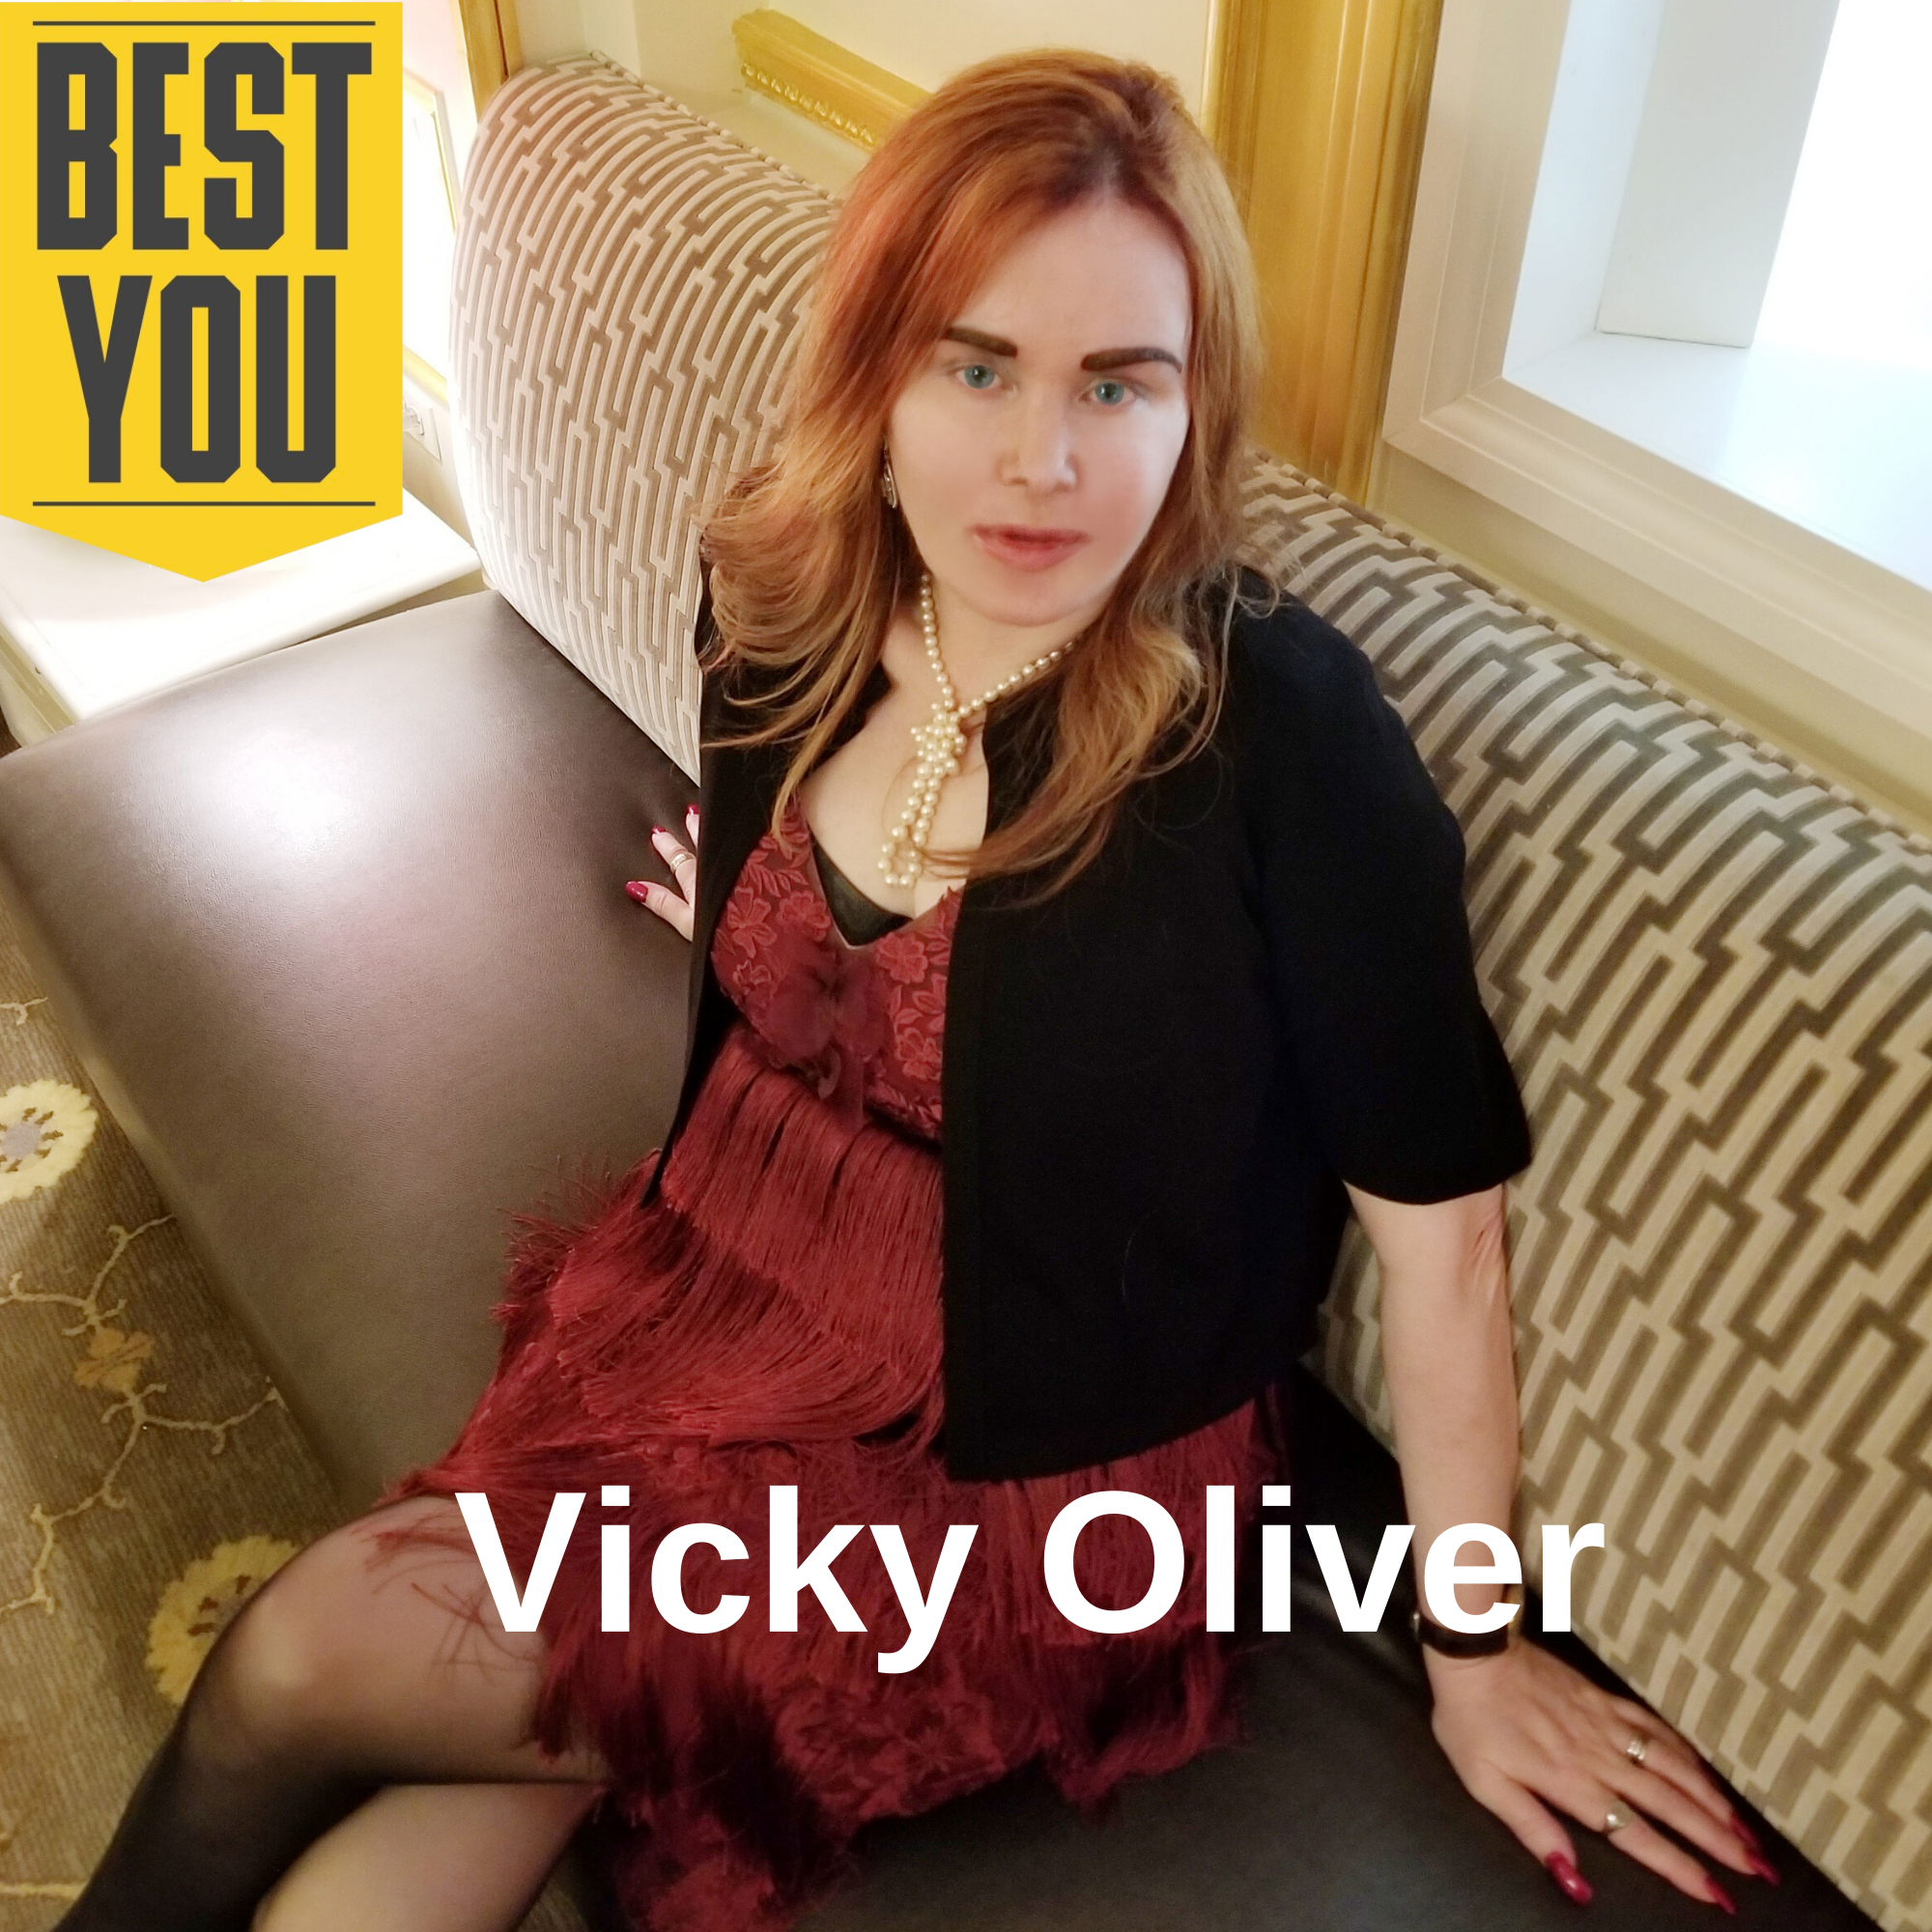 175. Vicky Oliver - Steps to take when job hunting, dealing with coworkers and bosses, and virtual workplace tips